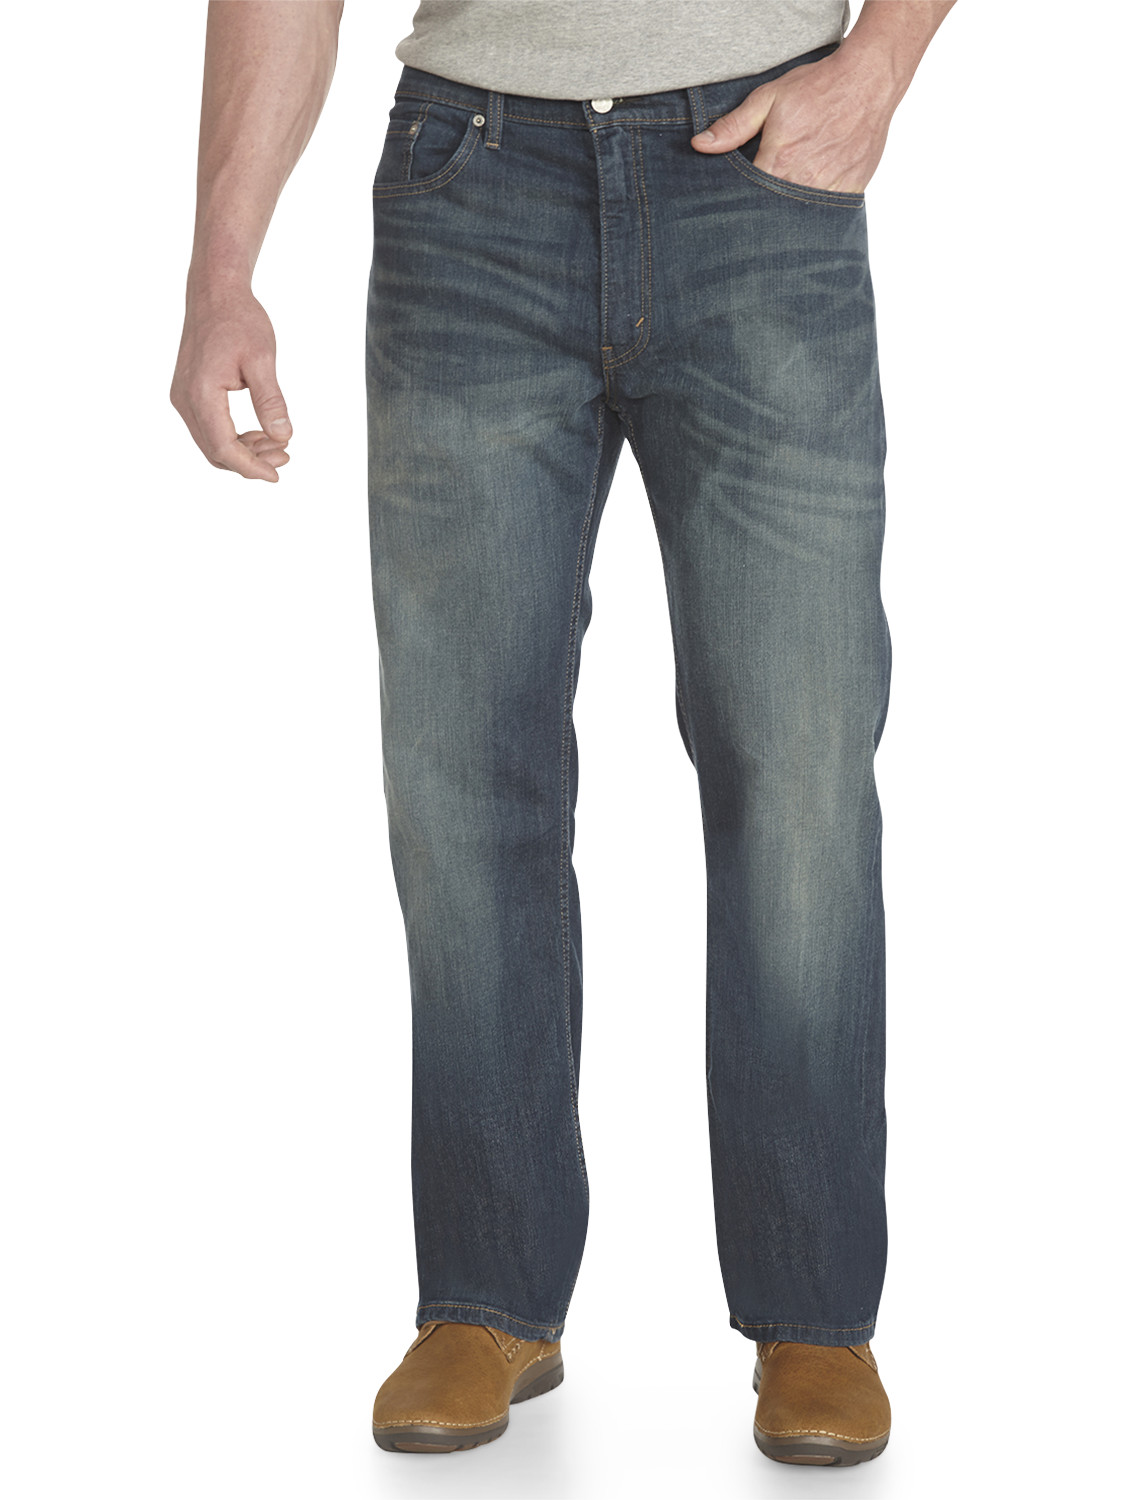 Big + Tall | Levi's 559 Relaxed Straight-Fit Stretch Jeans | DXL